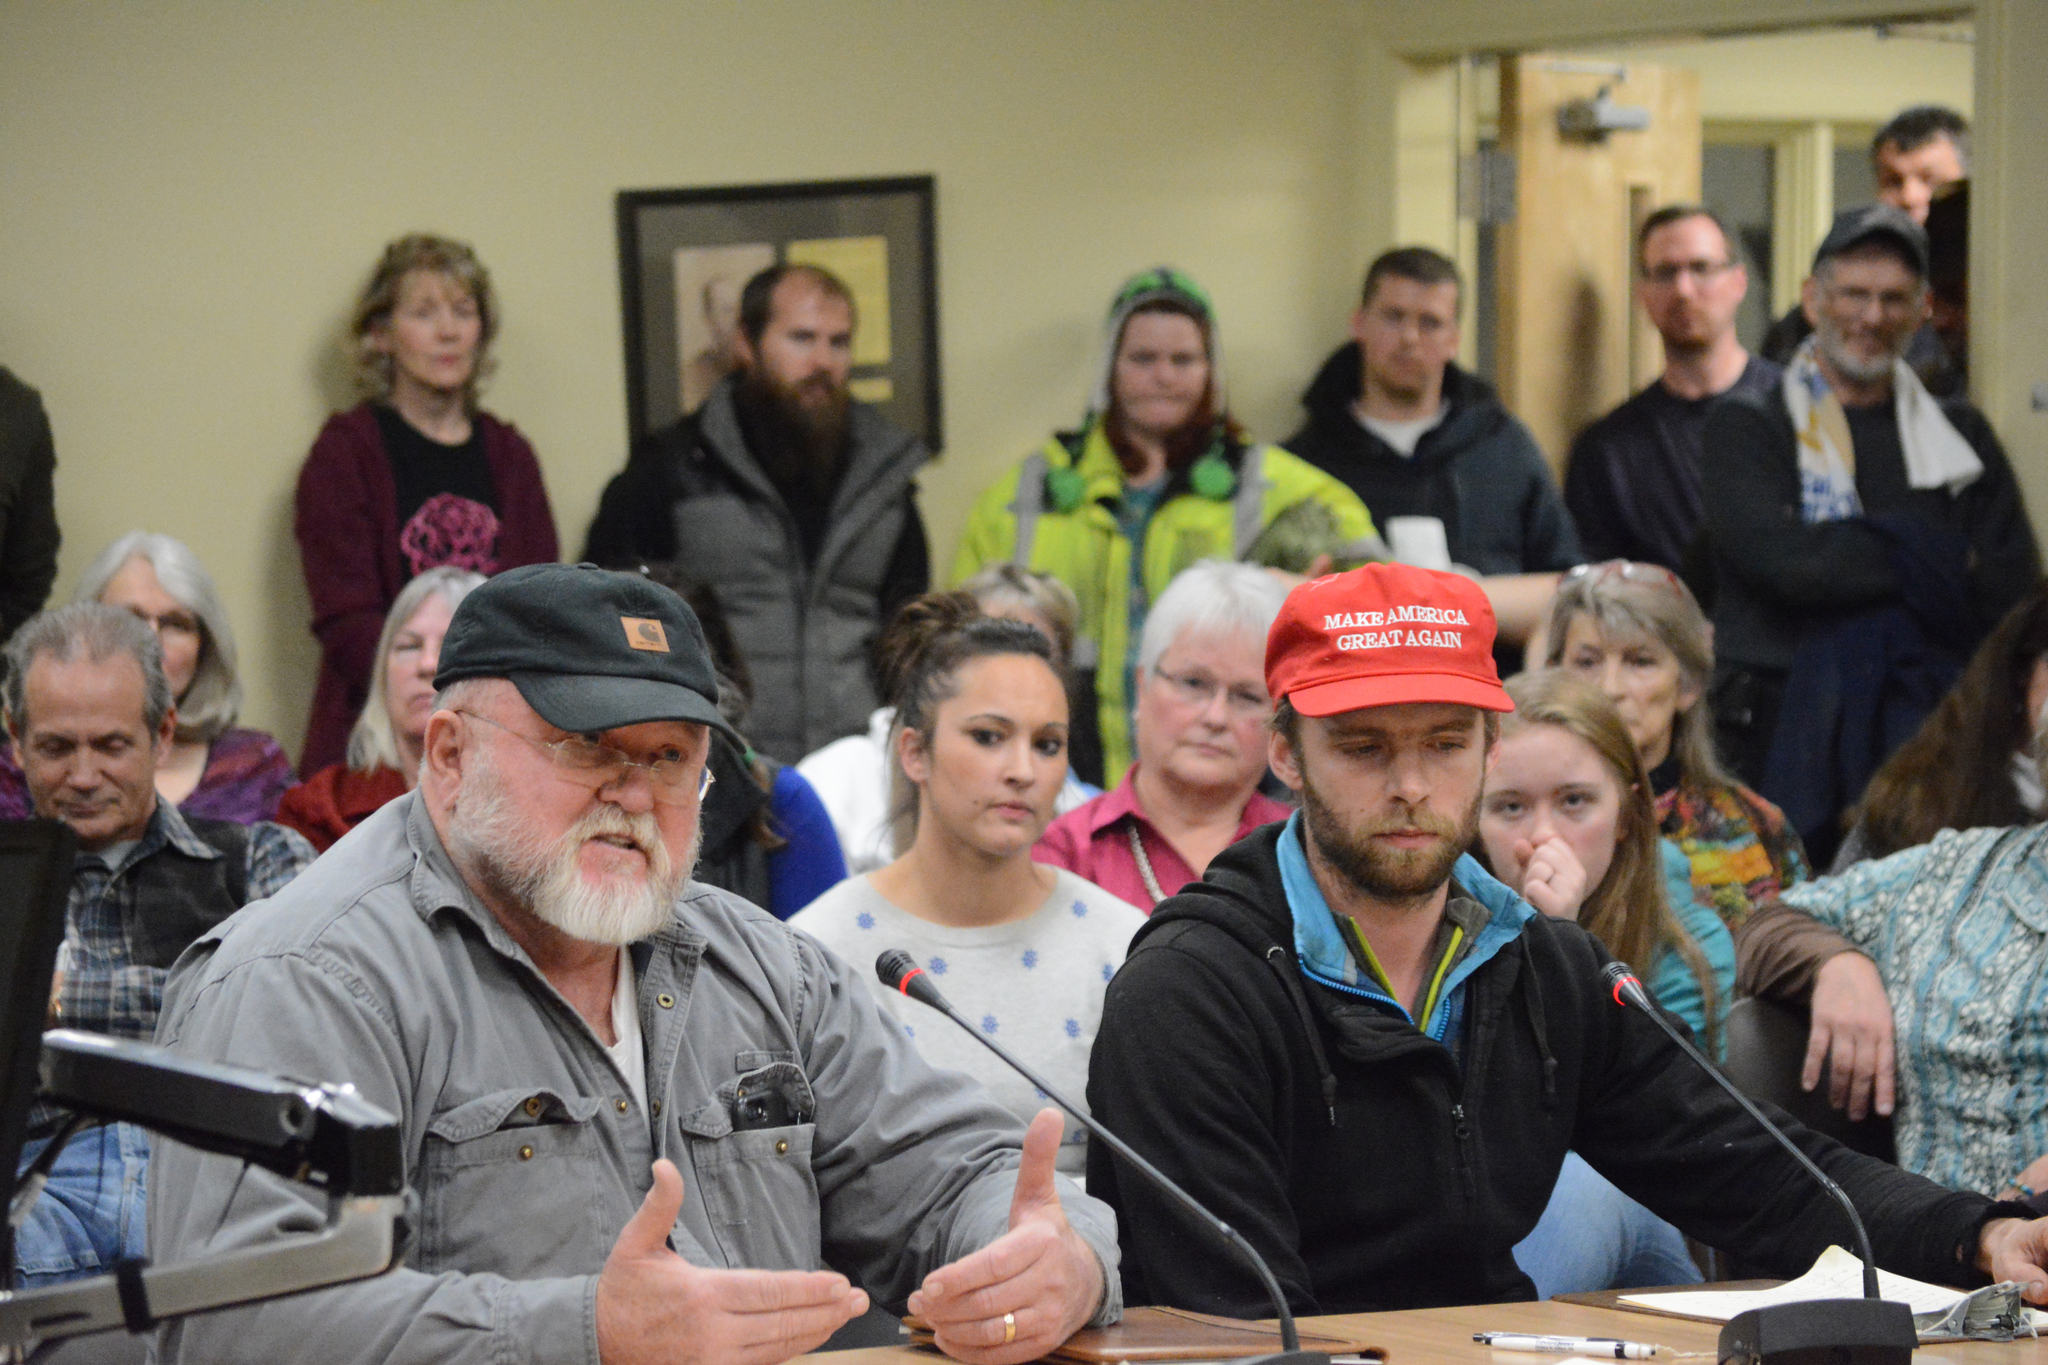 Vernon Atkinson, left, speaks, while Paul Riedel, right, in a “Make America Great Again” hat waits his turn to testify on Resolution 17-019 at the Homer City Council meeting on Monday night.